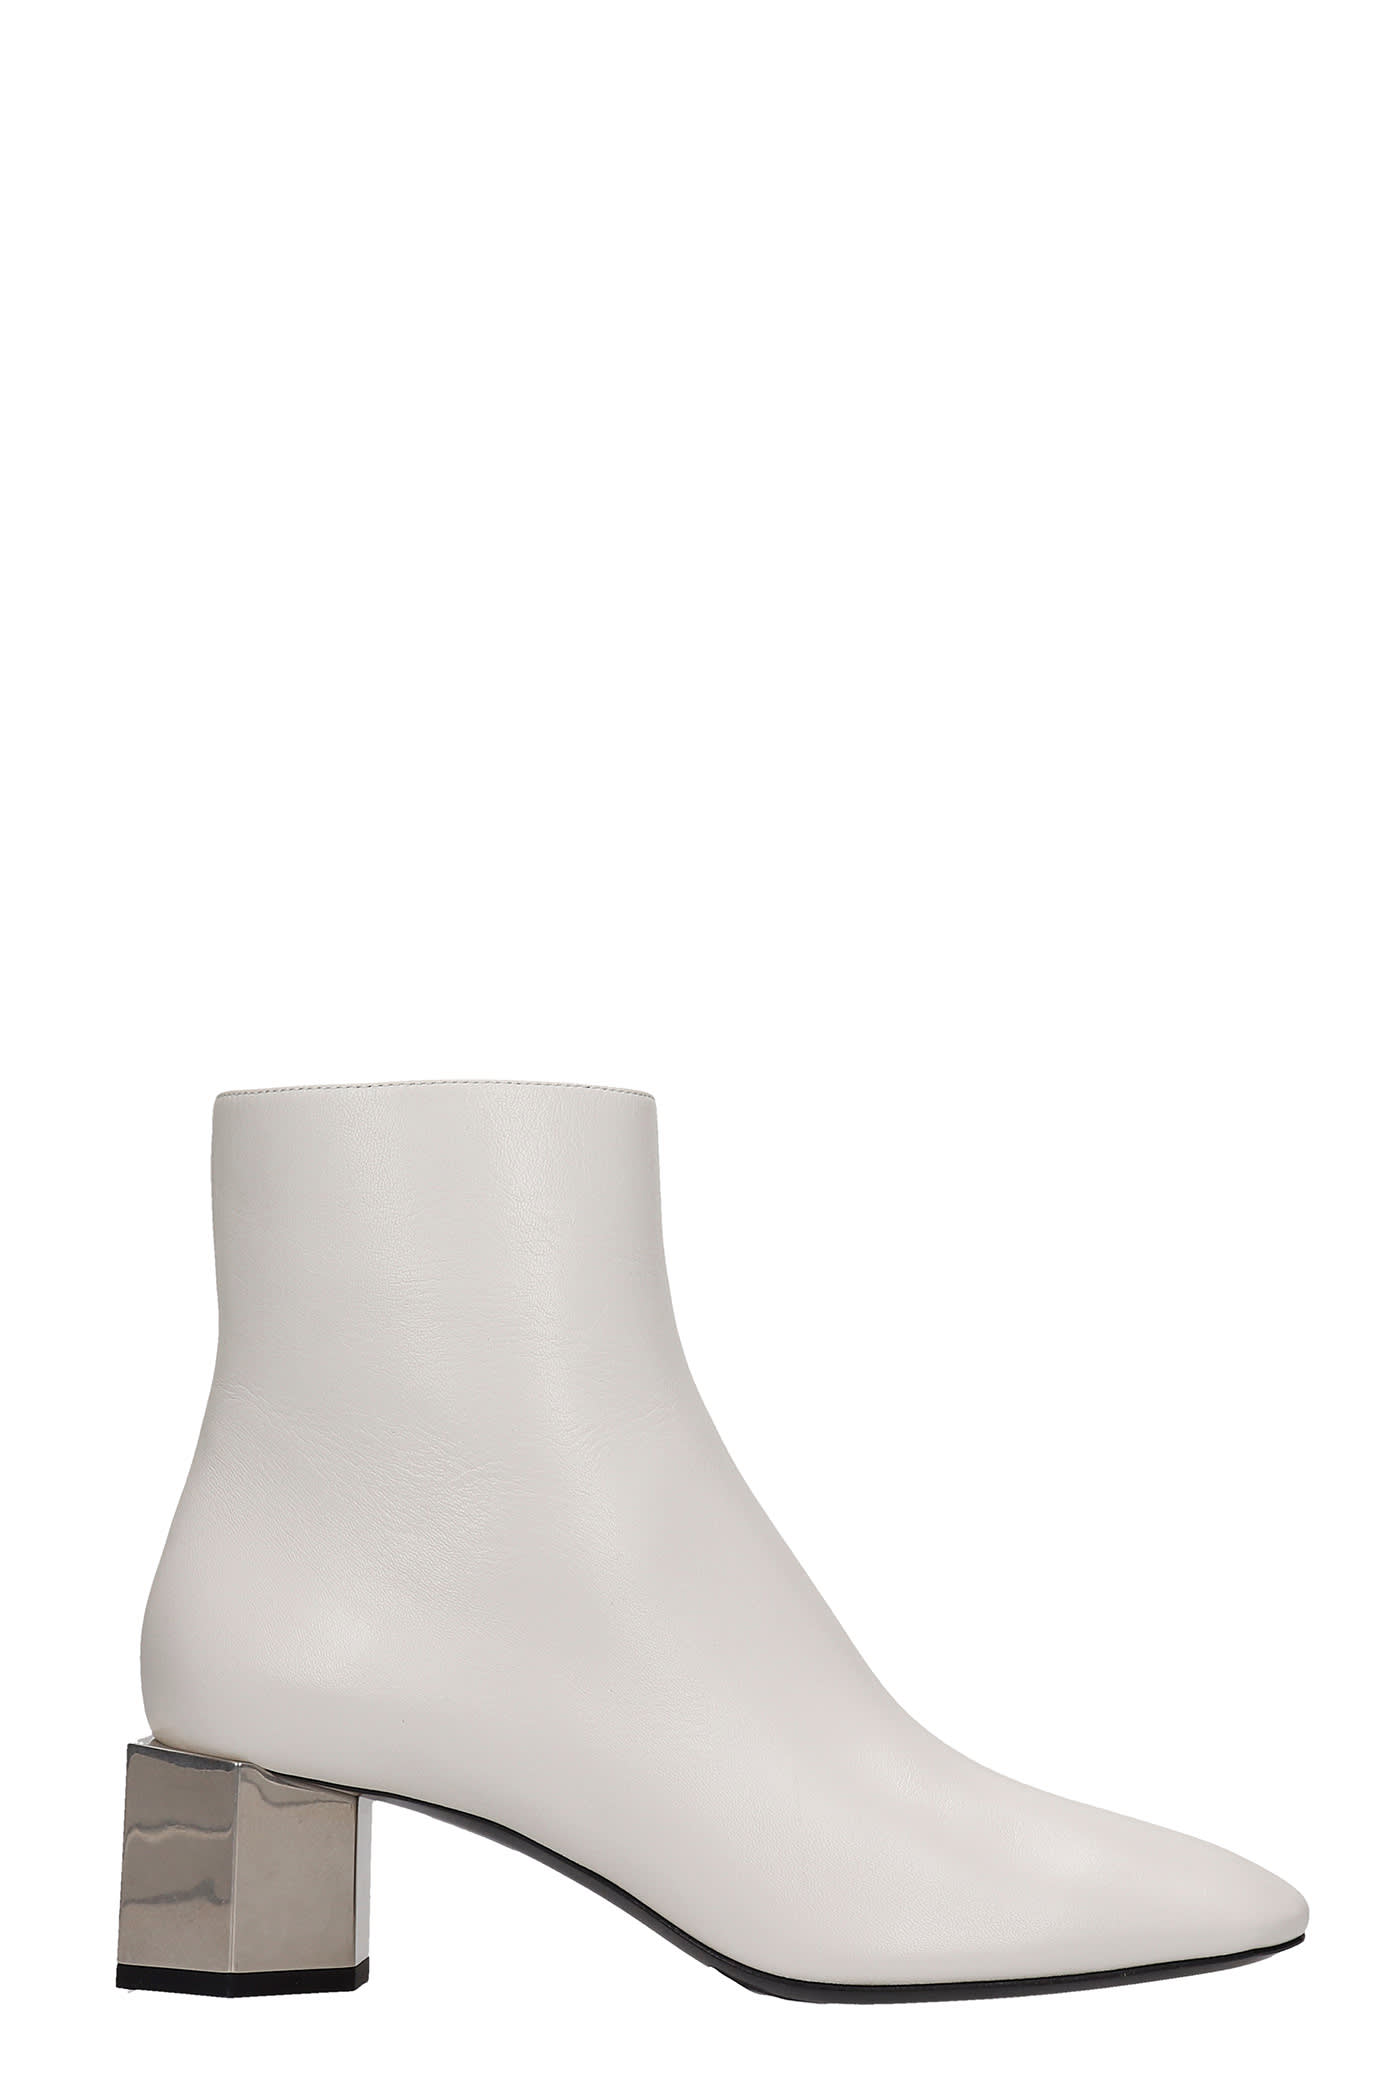 Off-White Low Heels Ankle Boots In White Leather